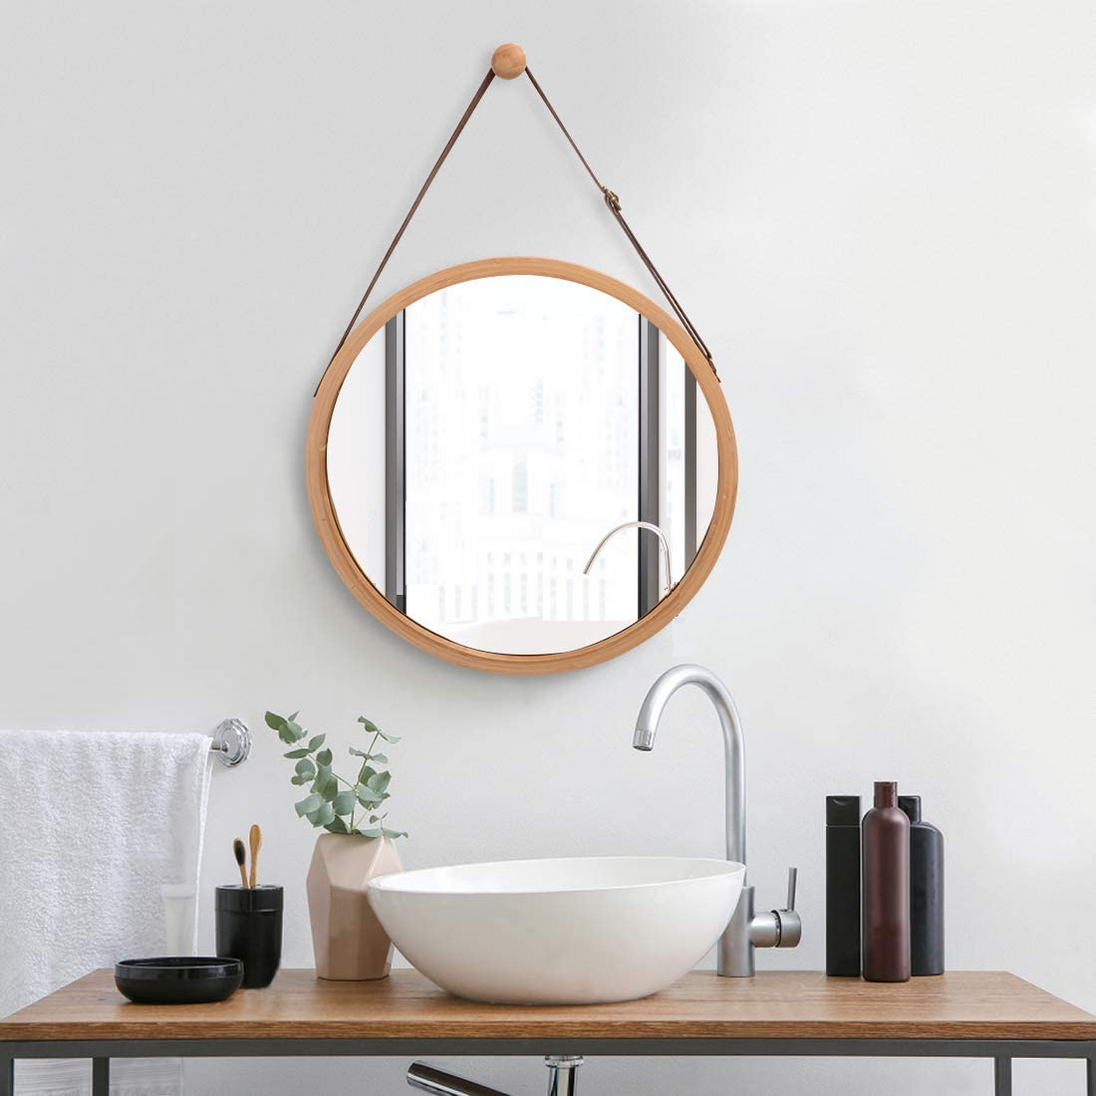 Hanging Round Wall Mirror 38 cm - Solid Bamboo Frame and Adjustable Leather Strap for Bathroom and Bedroom - Delldesign Living - Furniture > Bathroom - free-shipping